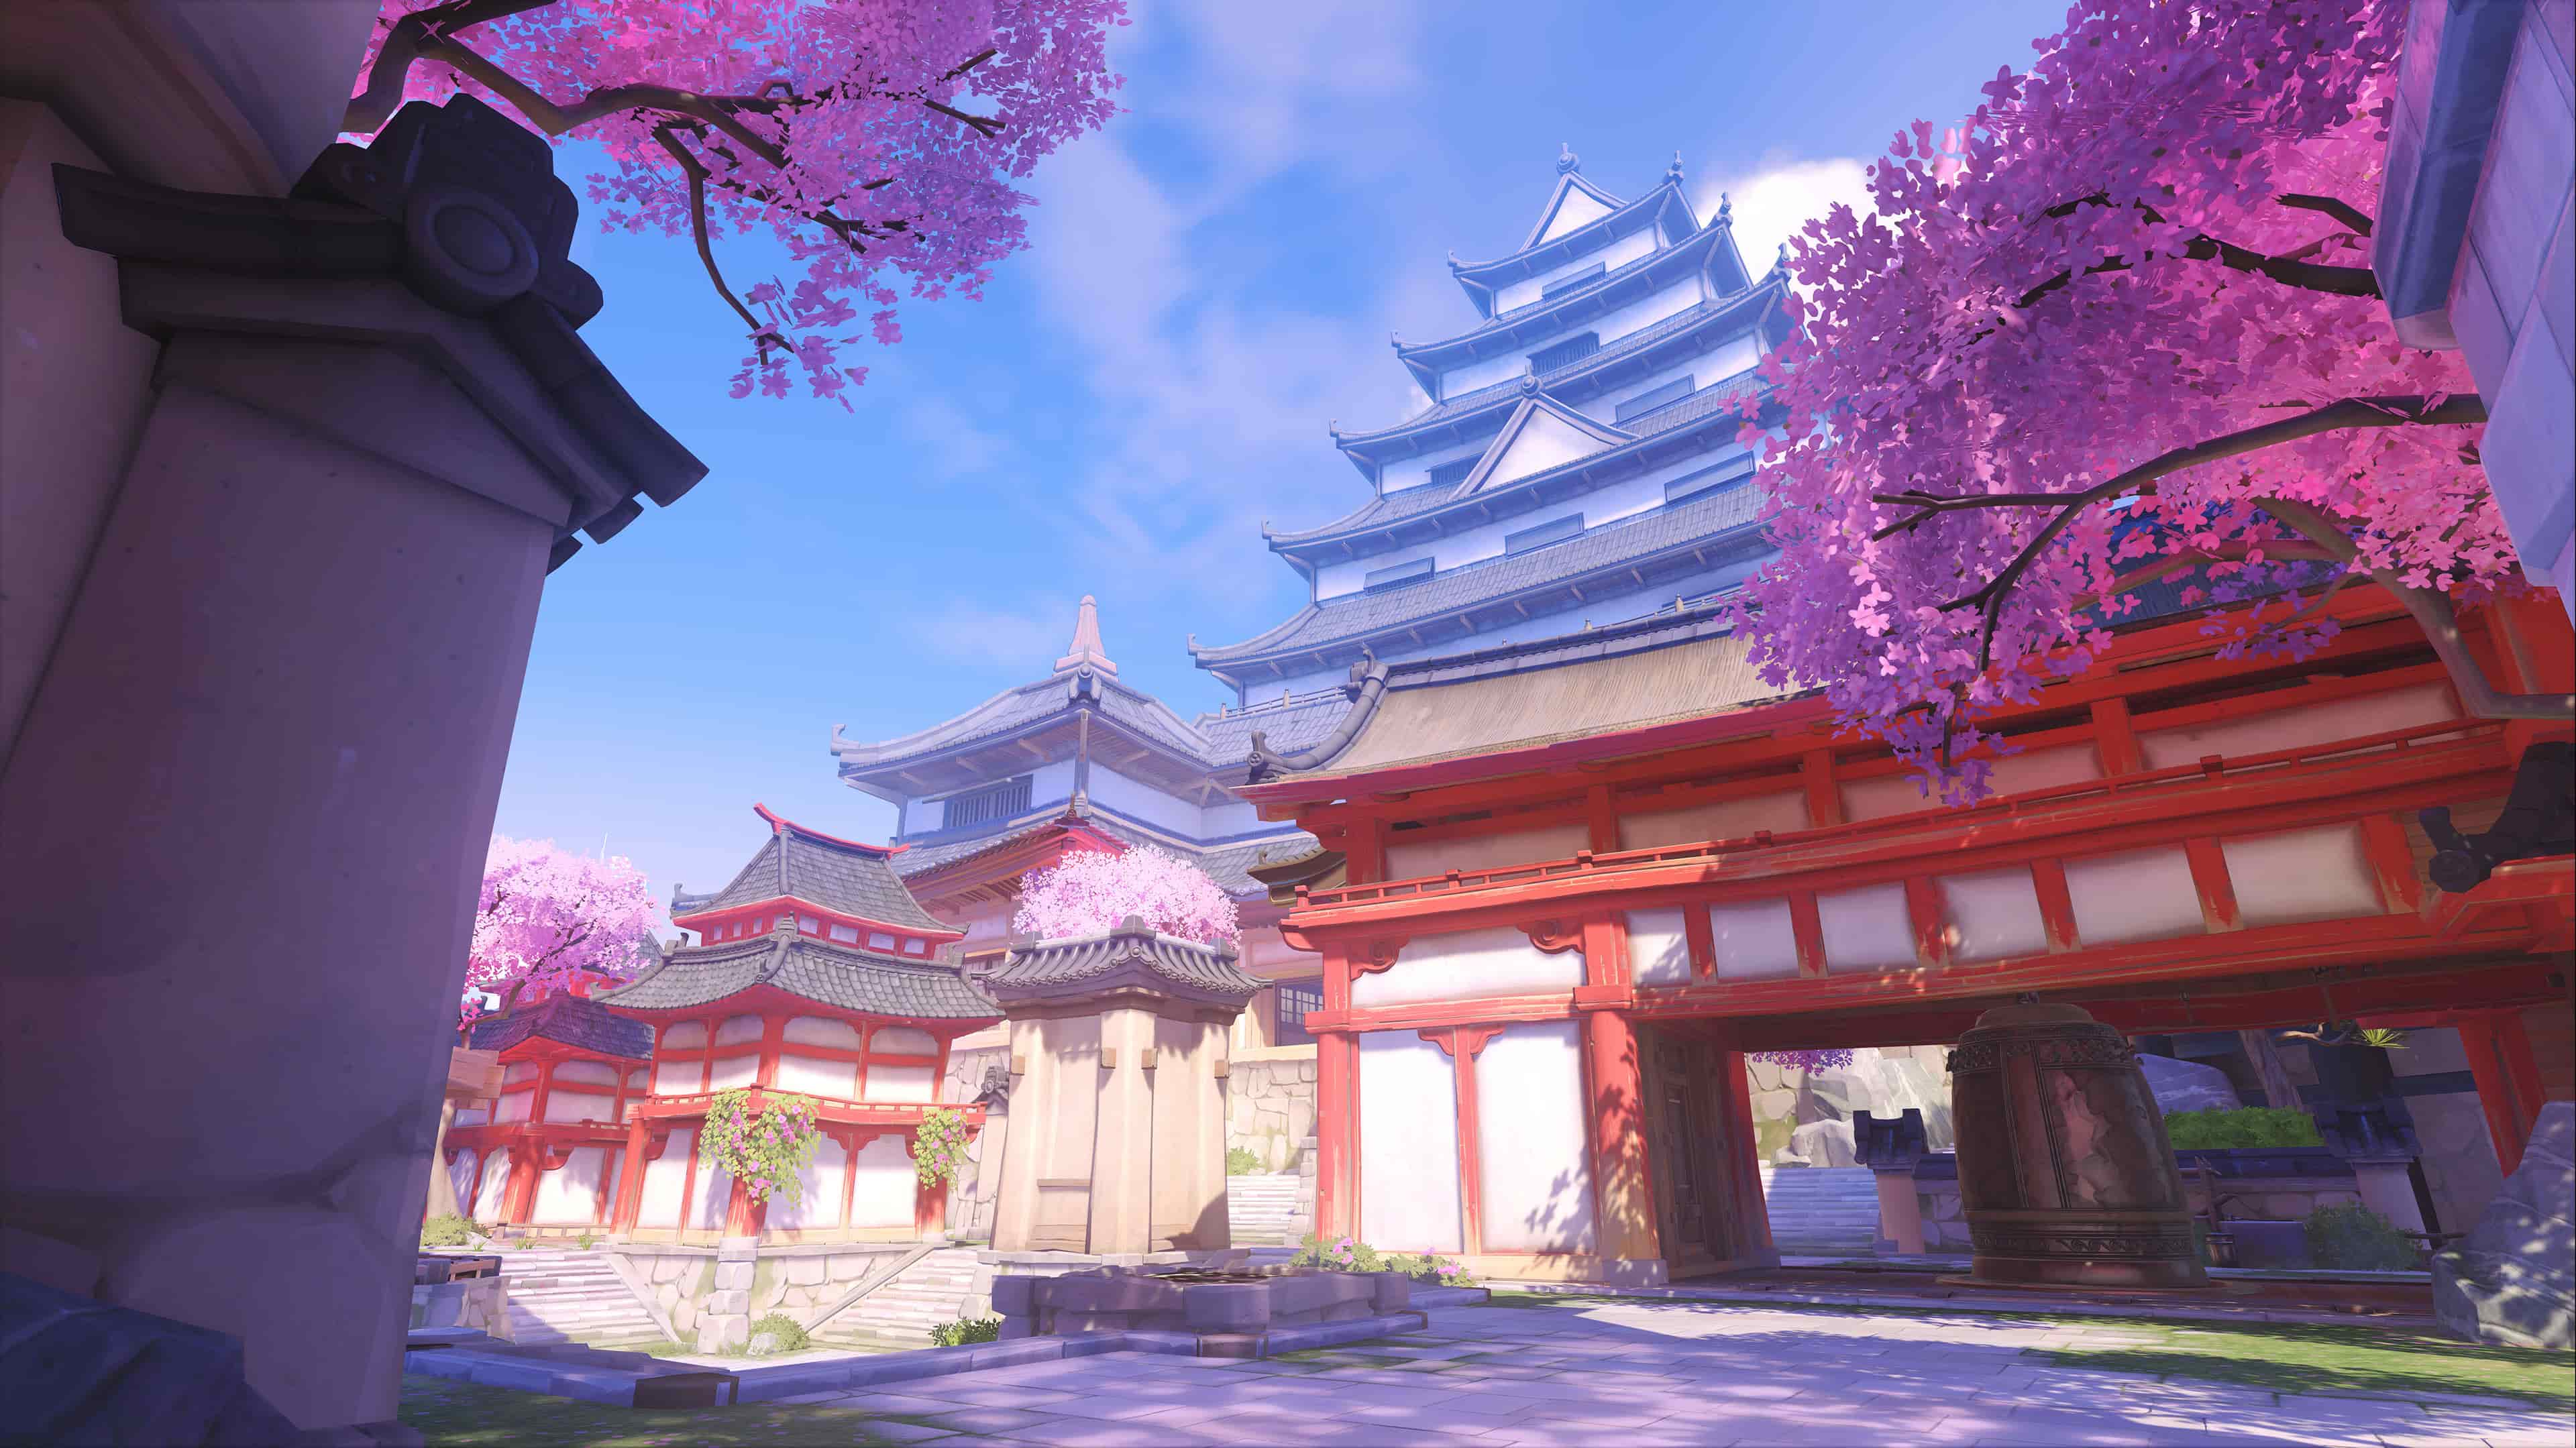 Hanaoka in Overwatch 2, a Japanese locale featuring old buildings and cherry blossoms.